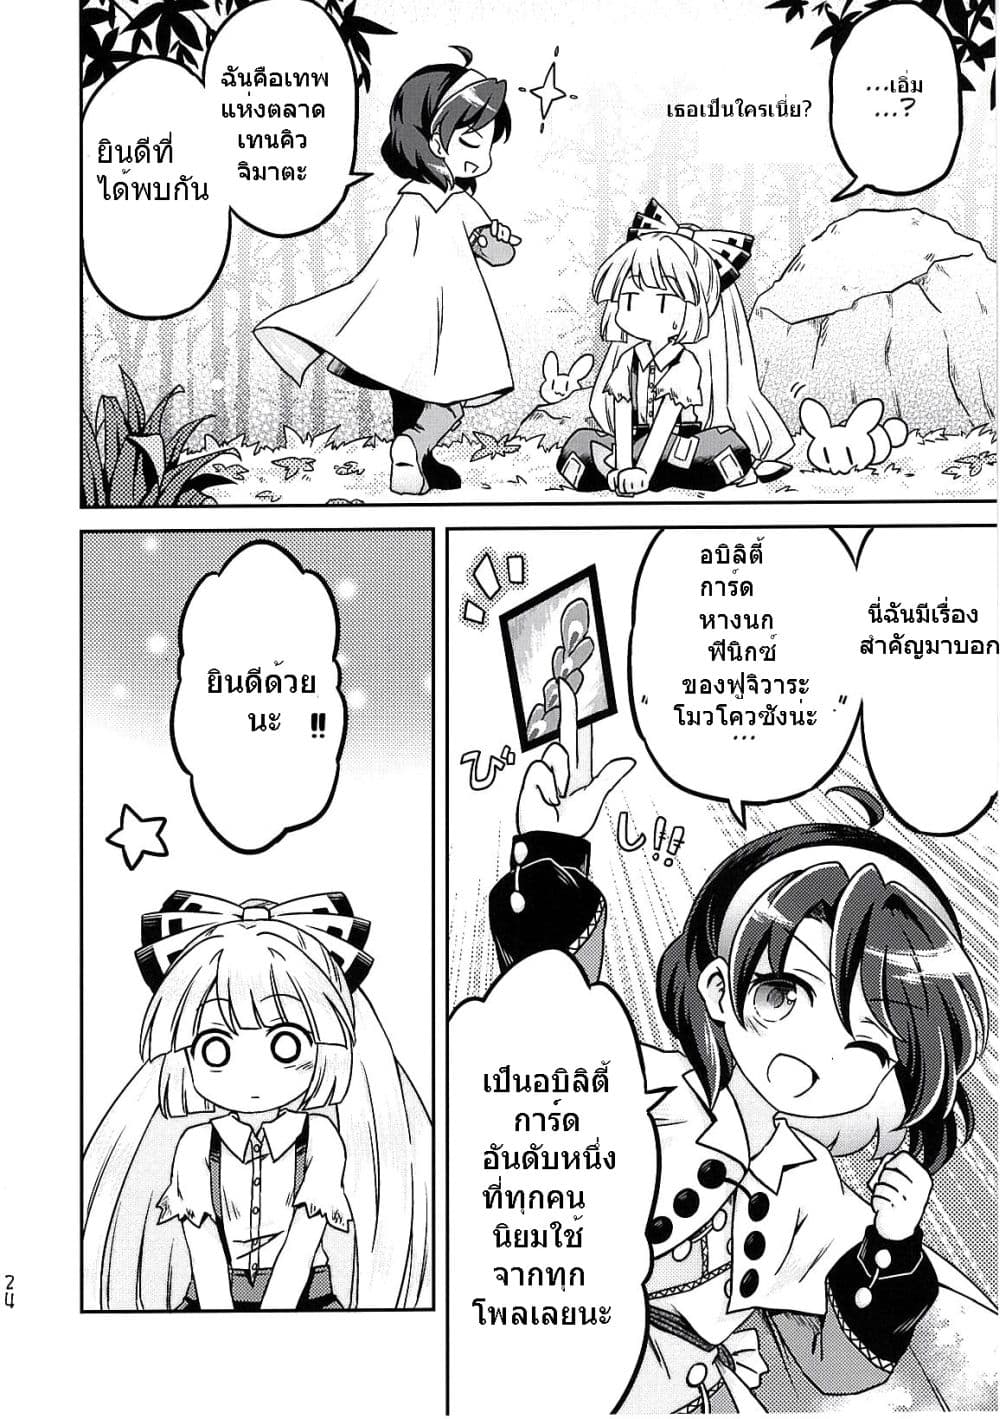 Touhou Project Chima Book By Pote ตอนที่ 2 (24)